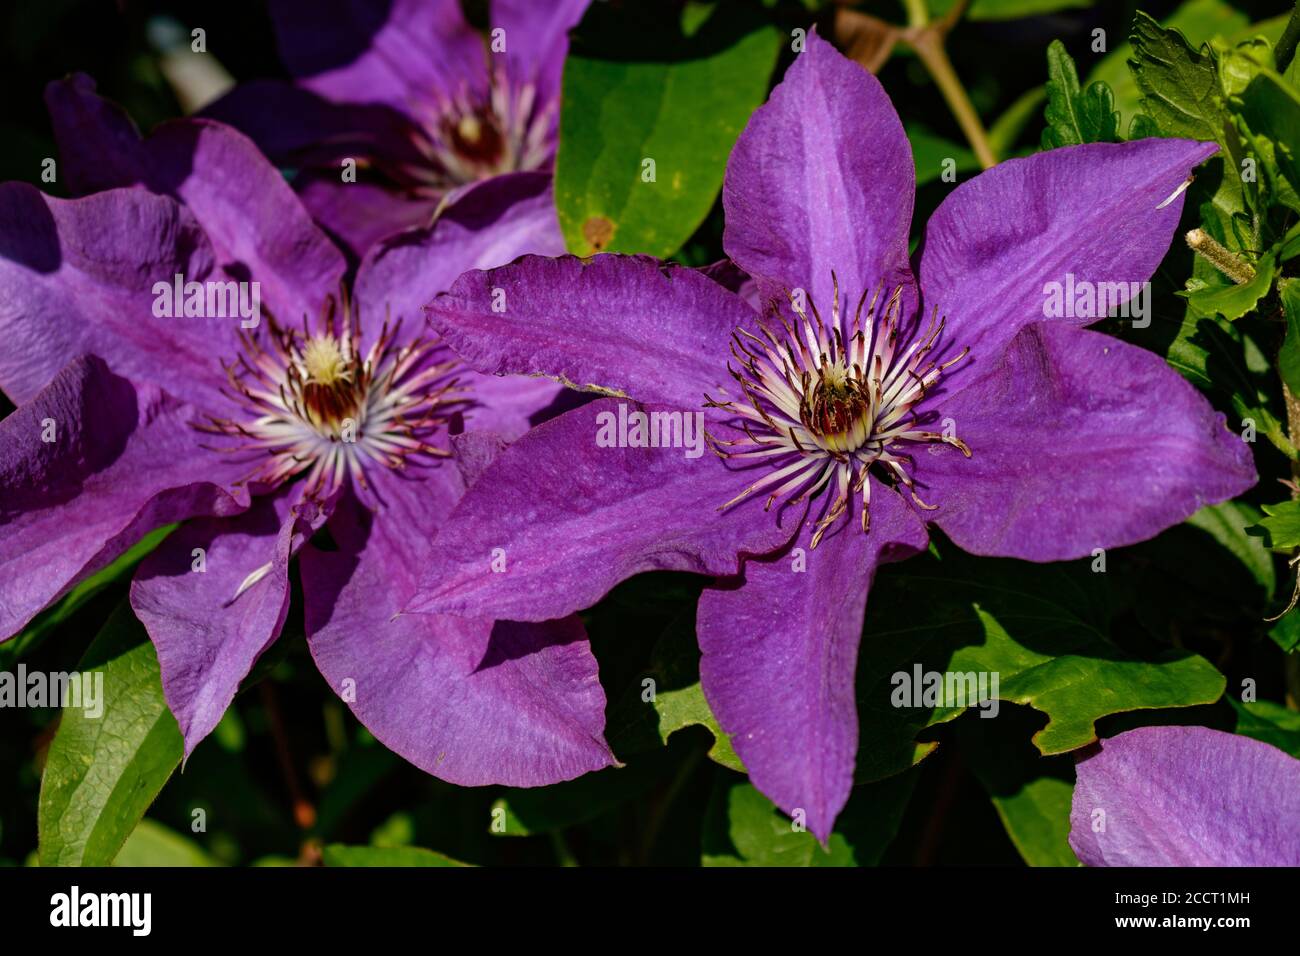 Closeup of purple clematis flowers (Clematis viticella) or Italian leather flower on a sunny day Stock Photo